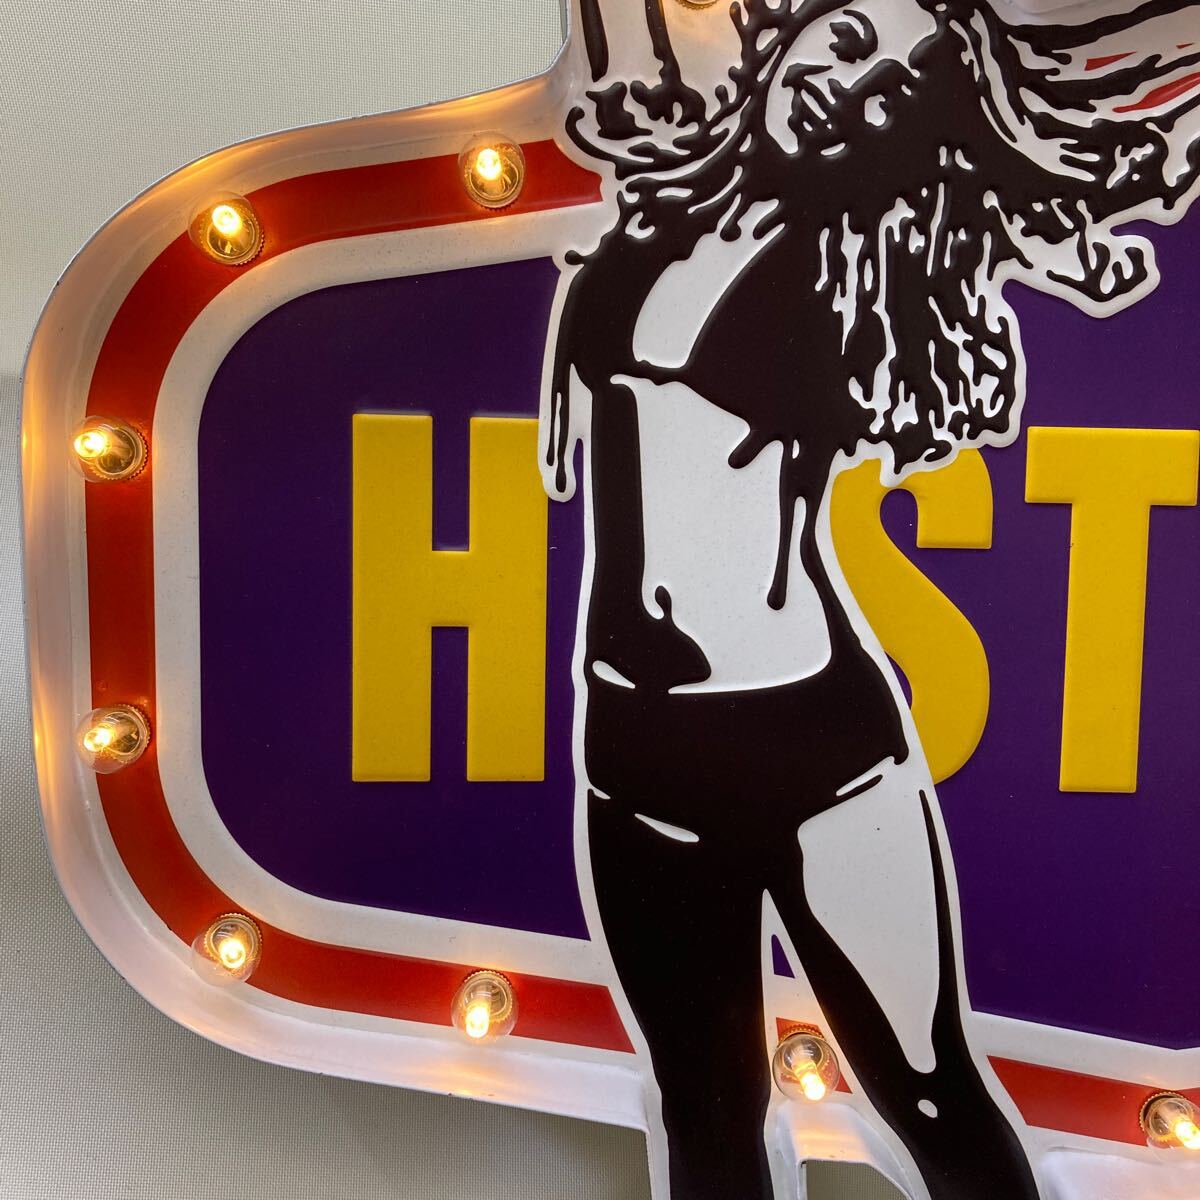 HYSTERIC GLAMOUR Novelty MARQUEE LIGHT Hysteric Glamour signboard ornament lamp lighting american miscellaneous goods 